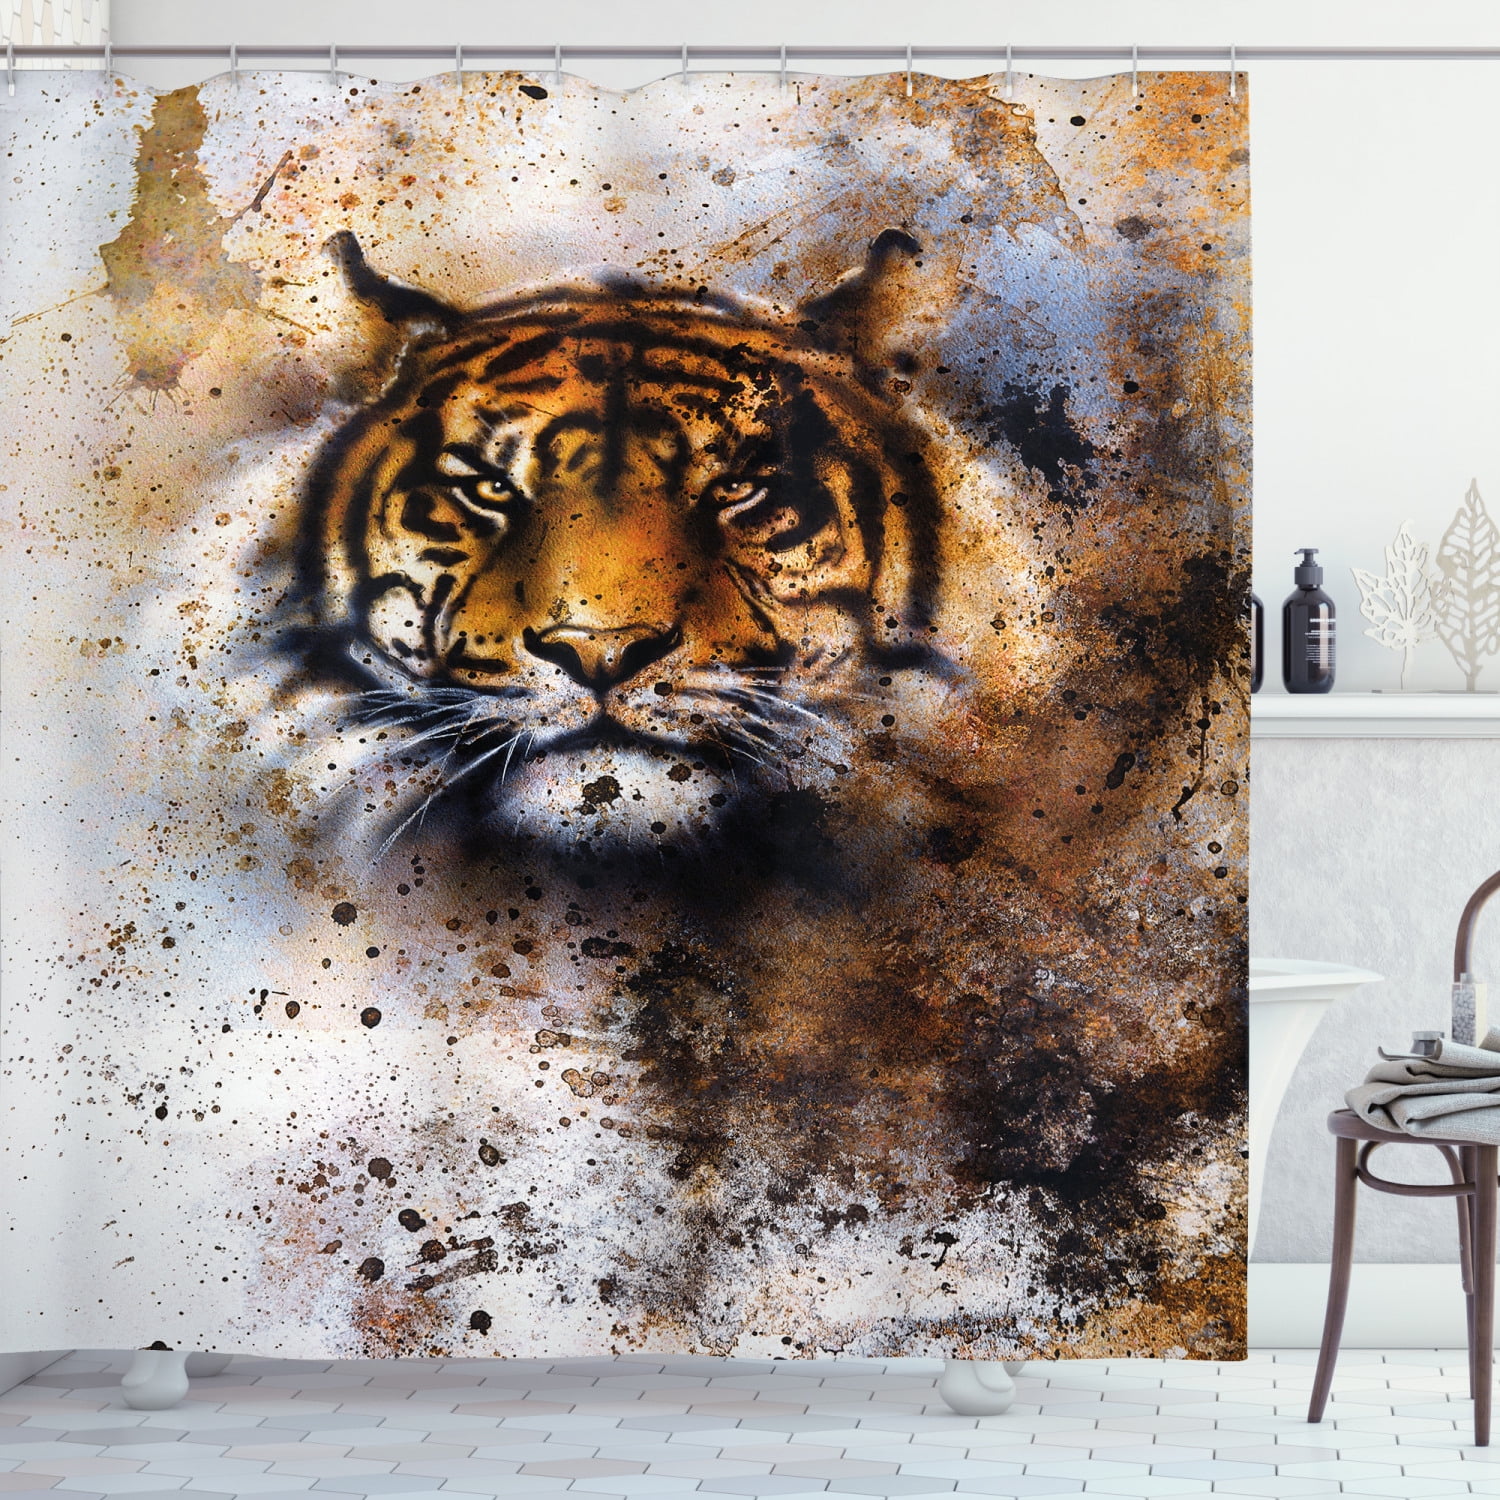 Tiger Leopard Lion 71" Fabric Shower Curtain Liner Polyester Bath Accessory Sets